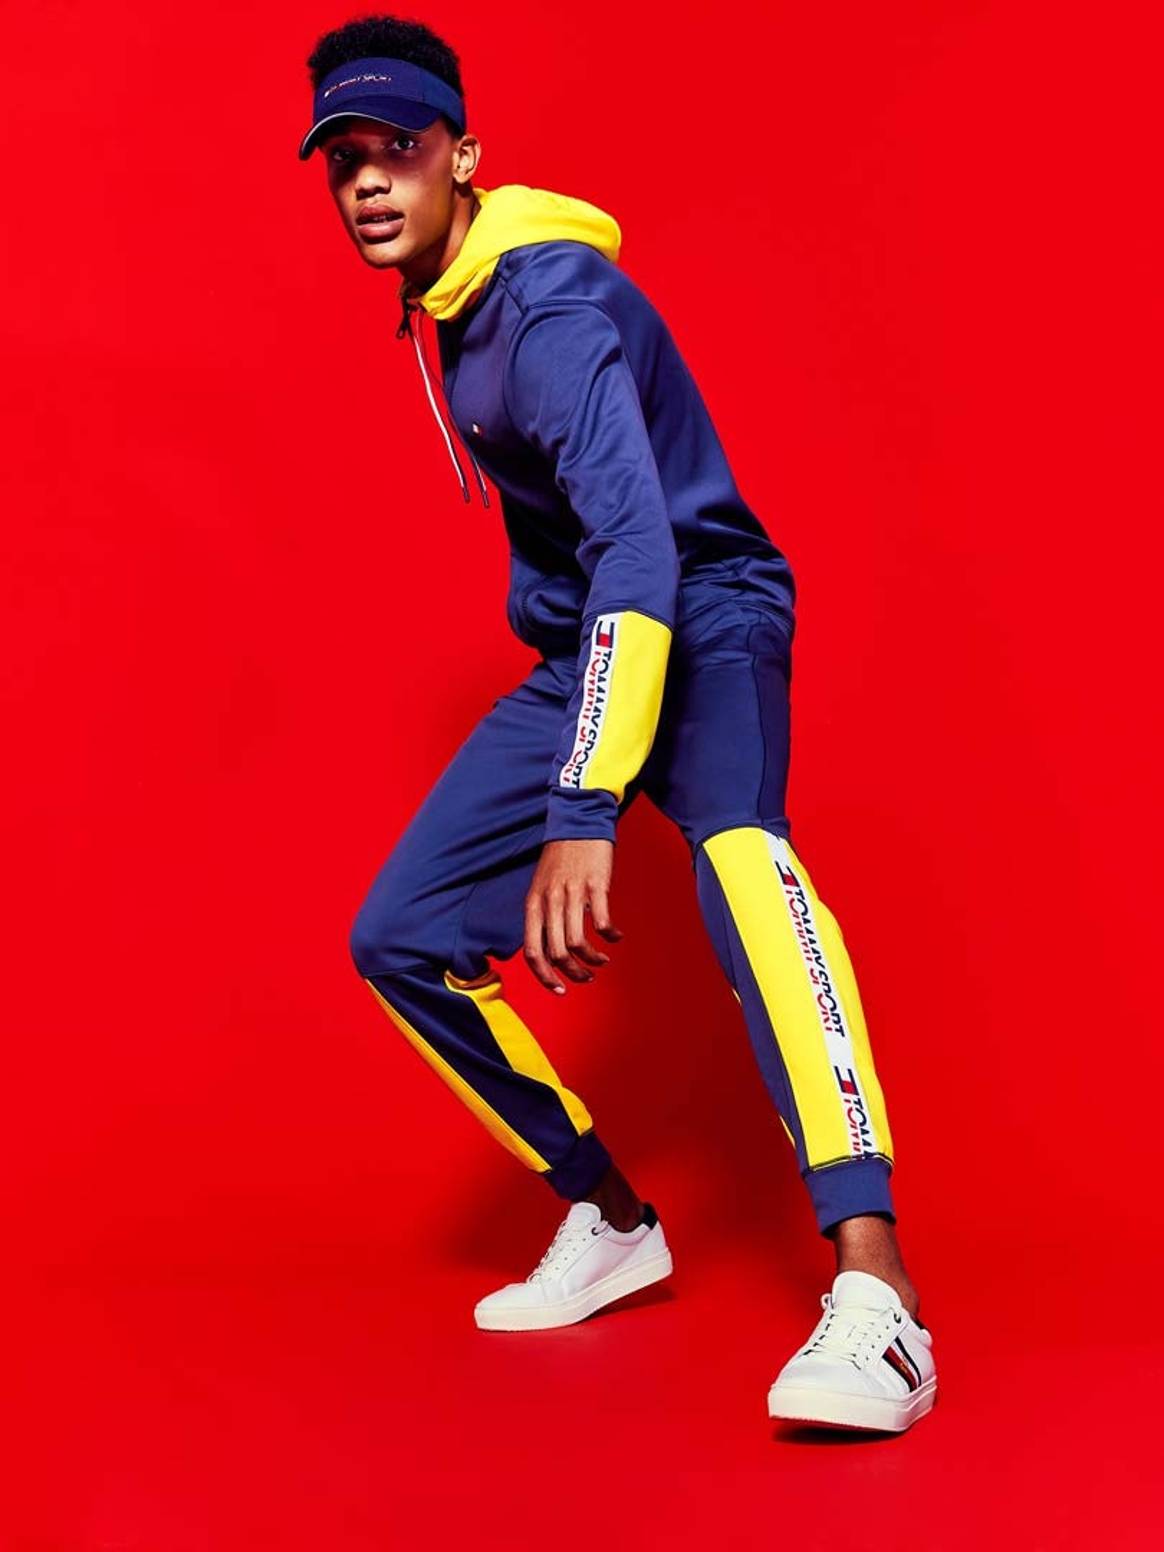 In pictures: Tommy Hilfiger launches Tommy sport, its first sportswear apparel line